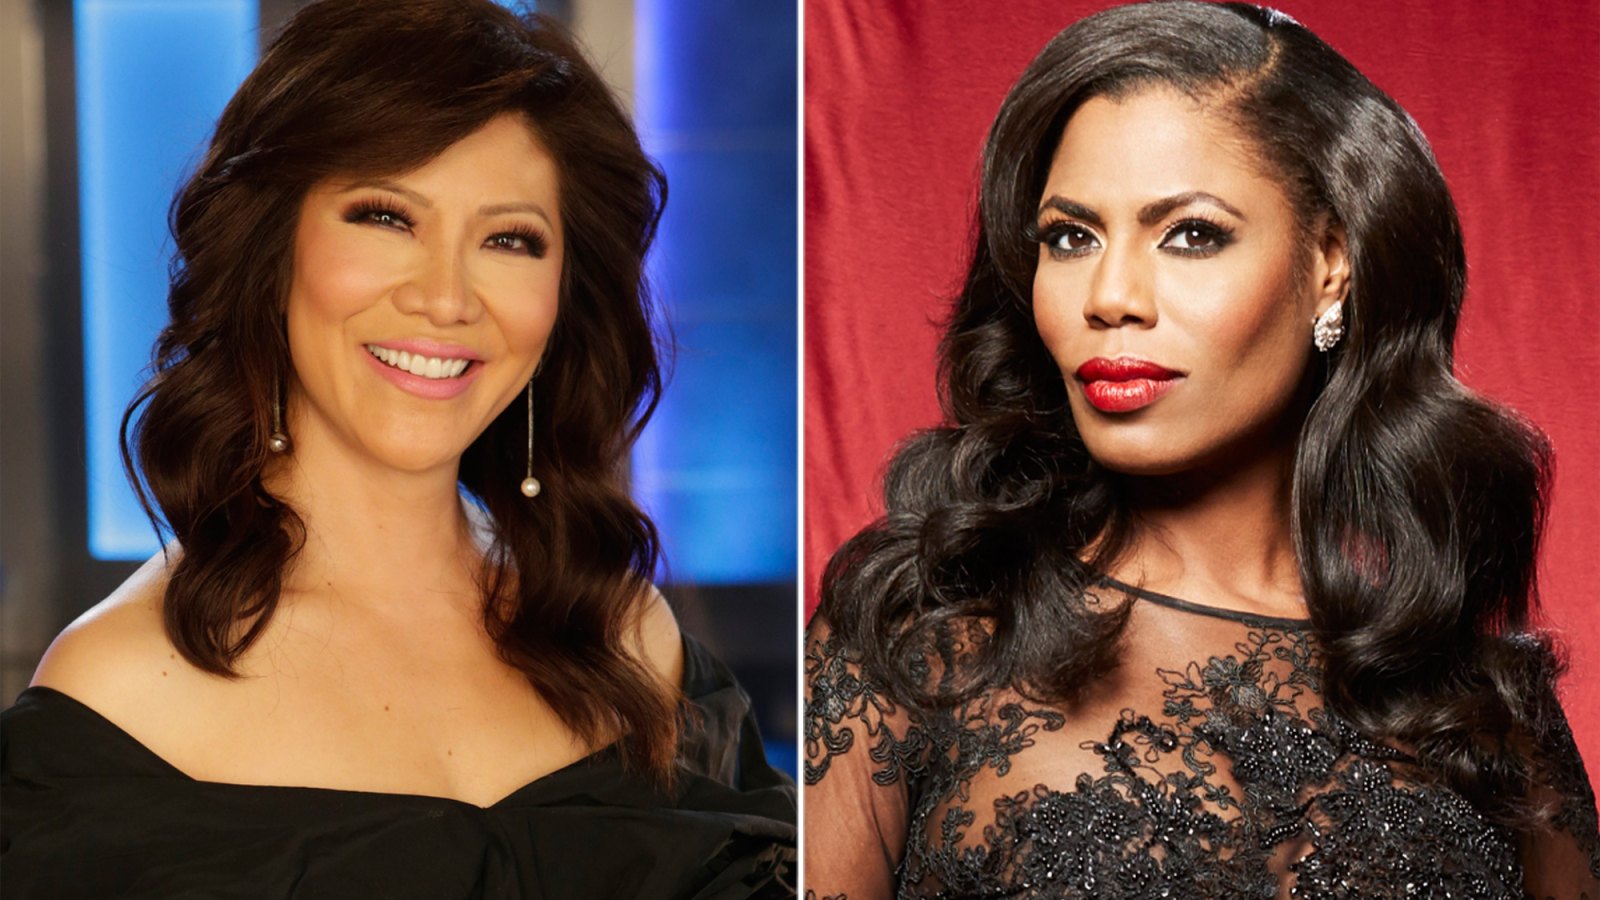 Julie Chen and Omarosa appear on Big Brother: Celebrity Edition